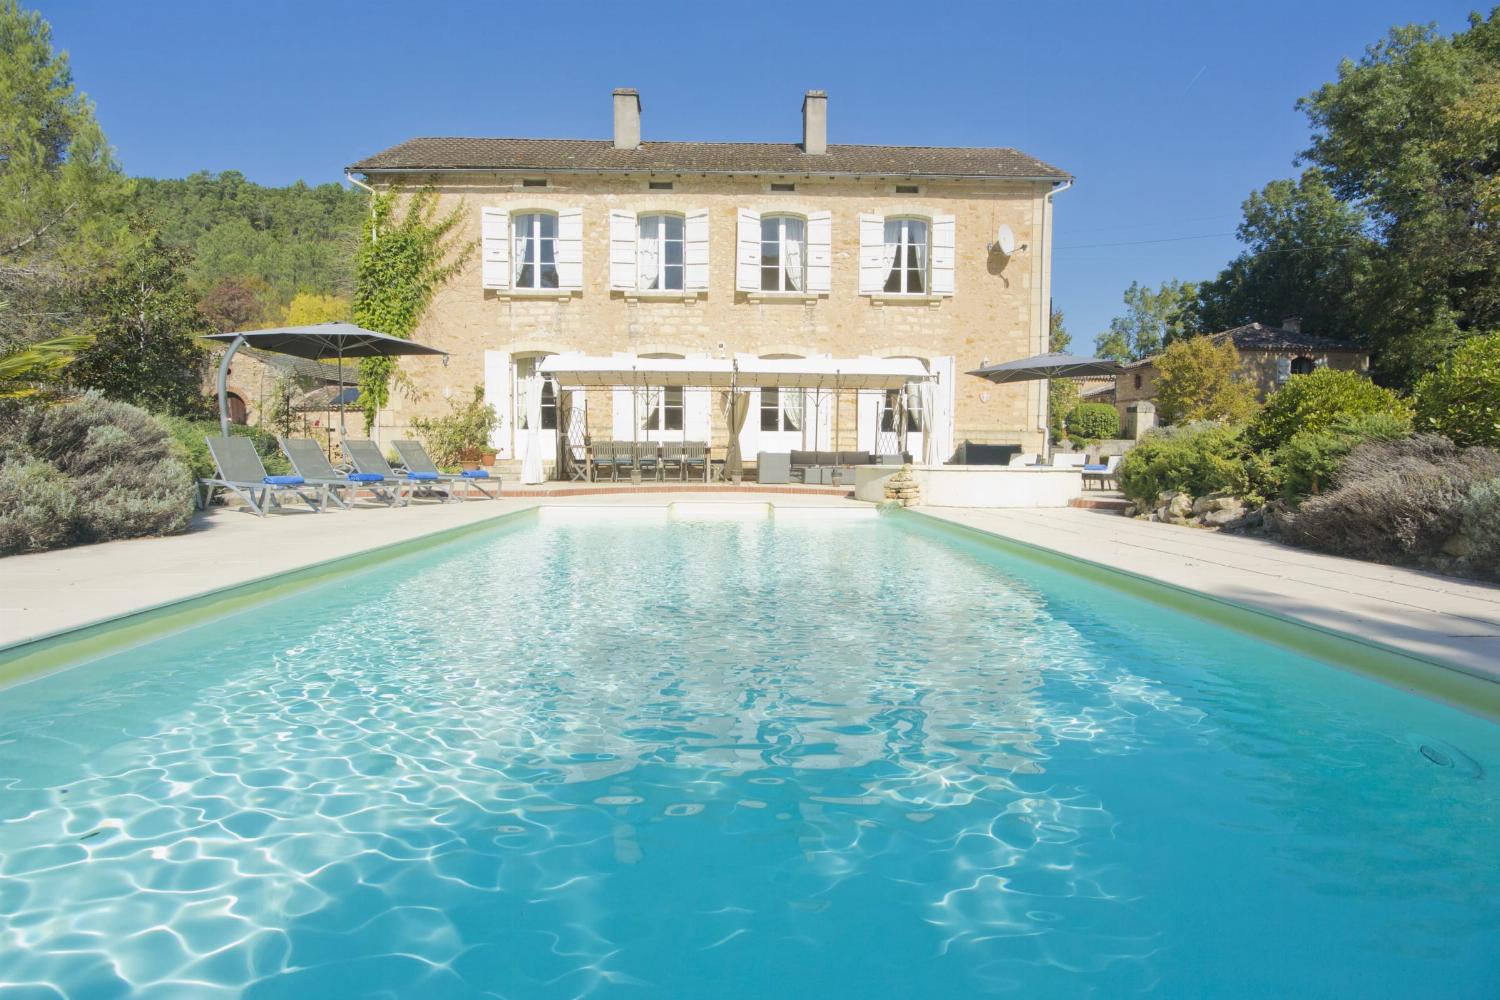 Rental home in Nouvelle-Aquitaine with private heated pool